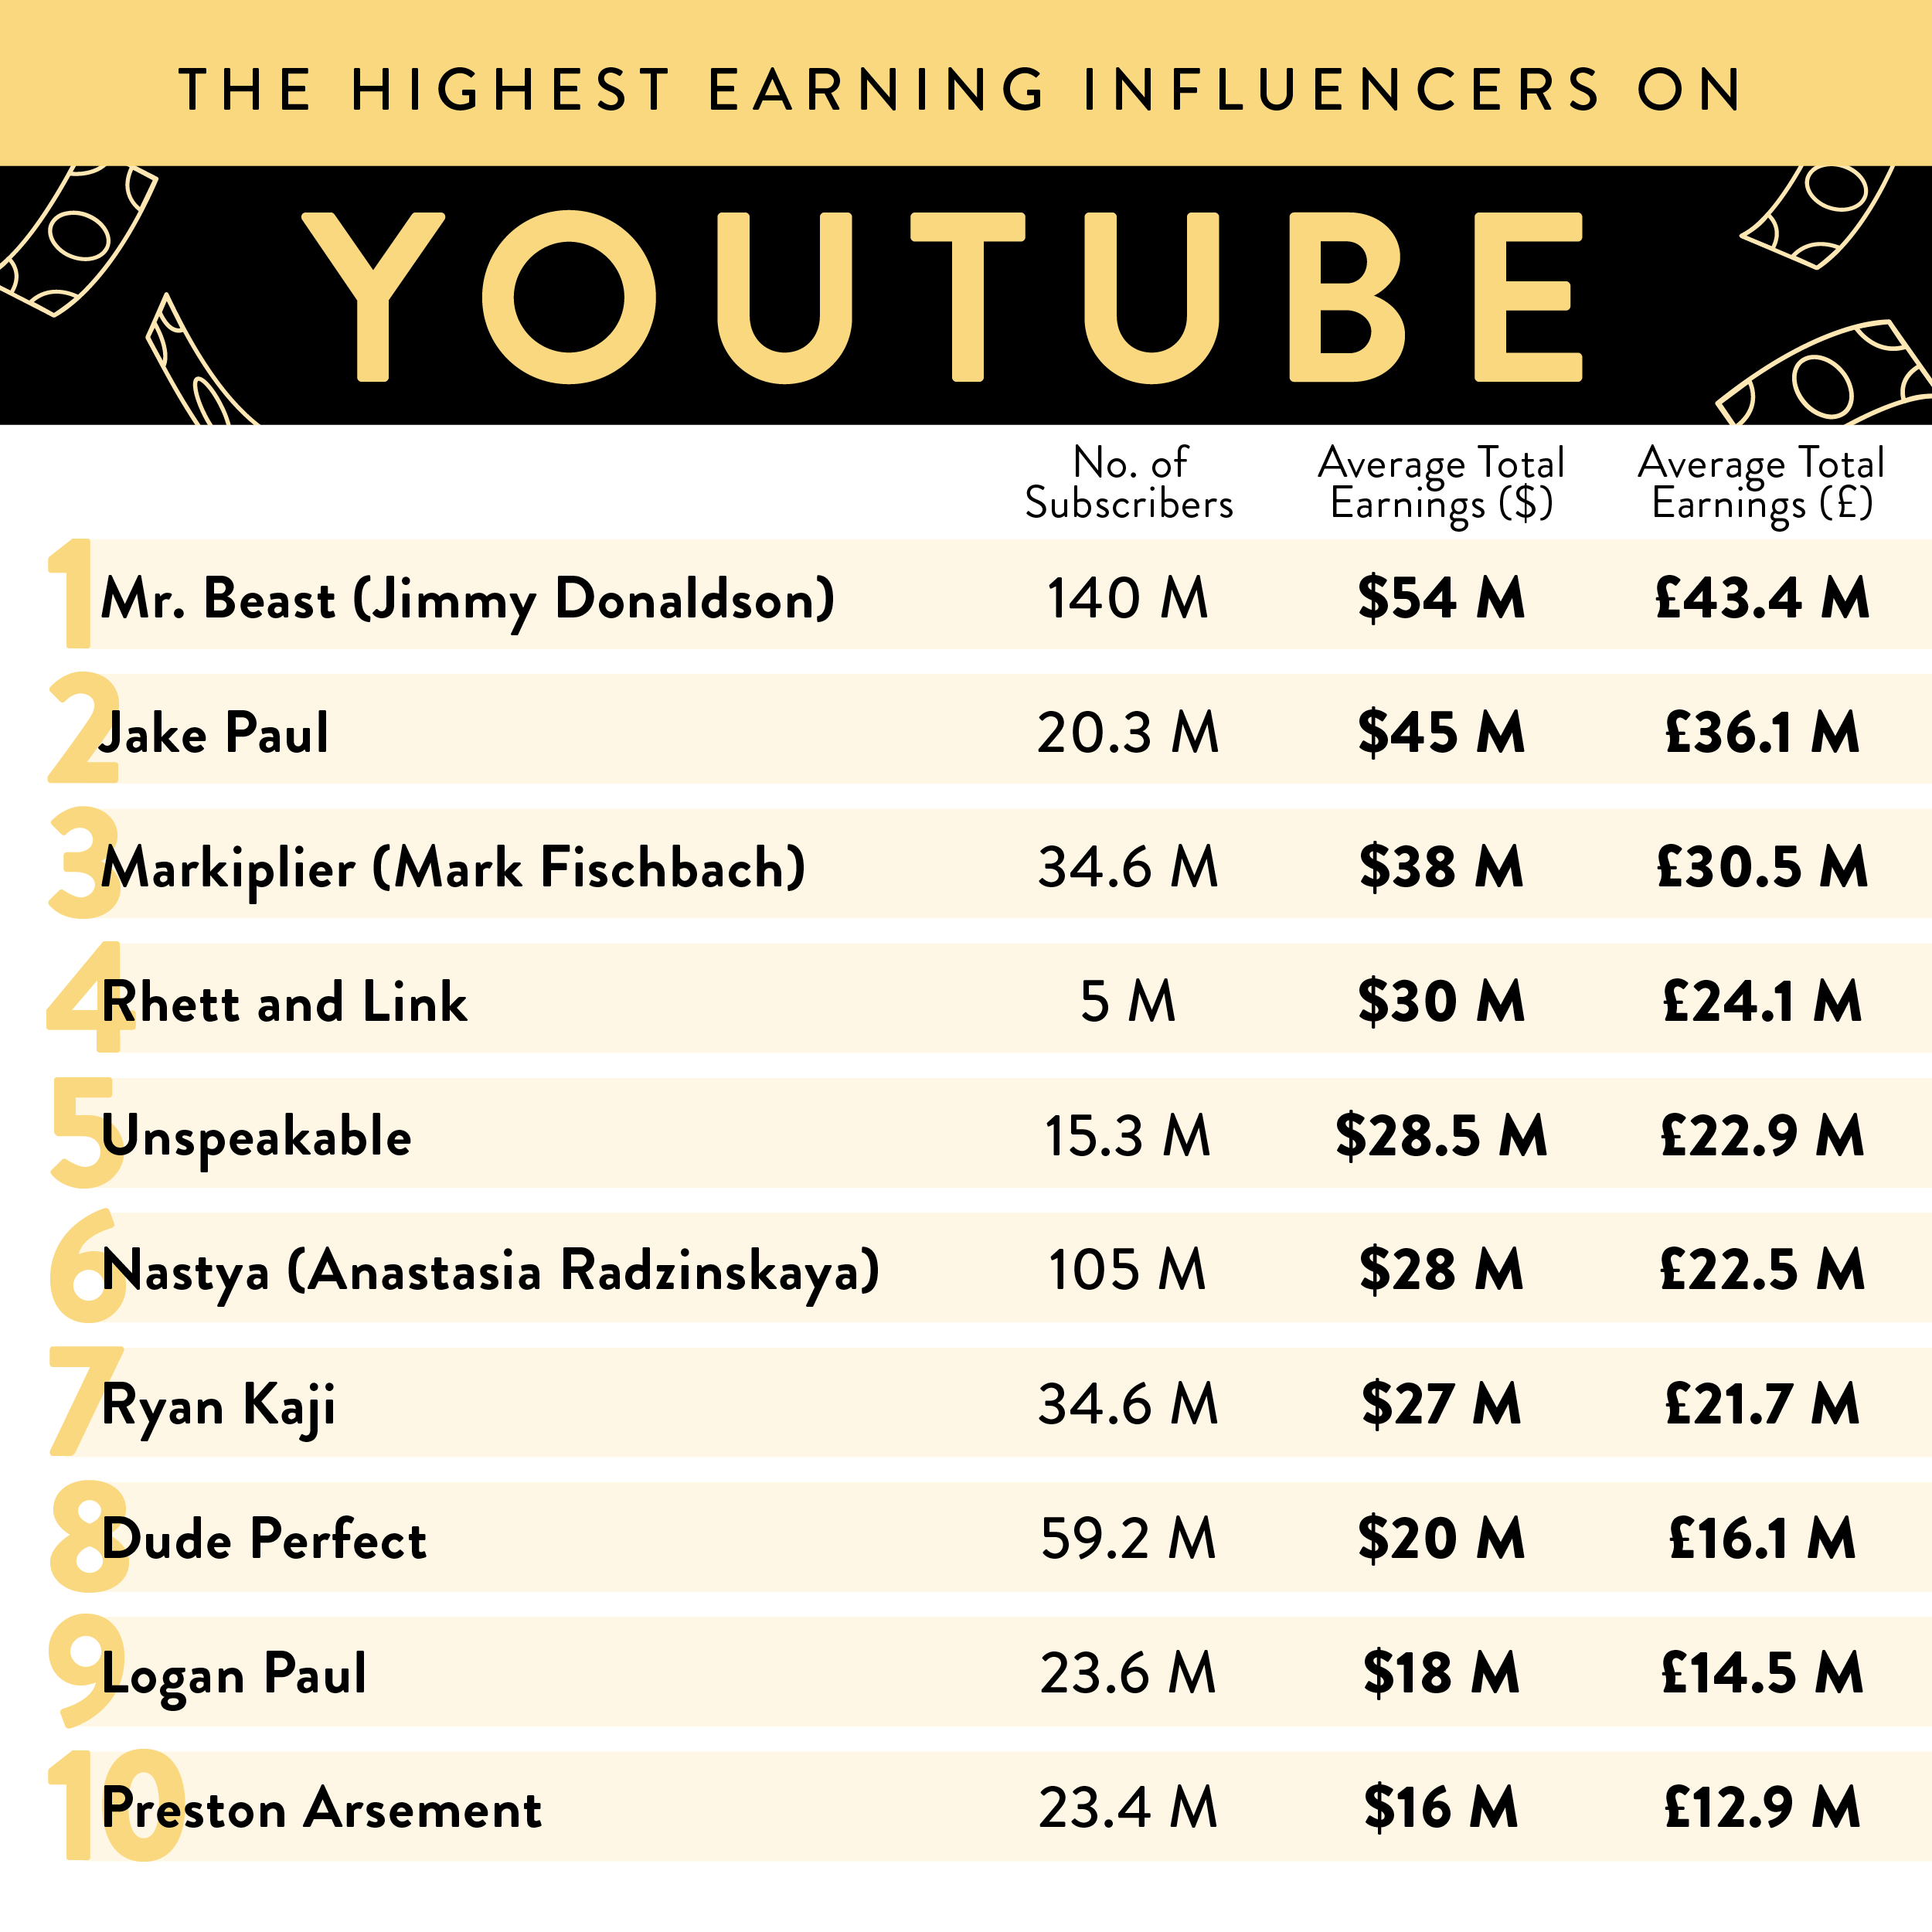 Table of highest earning users on YouTube